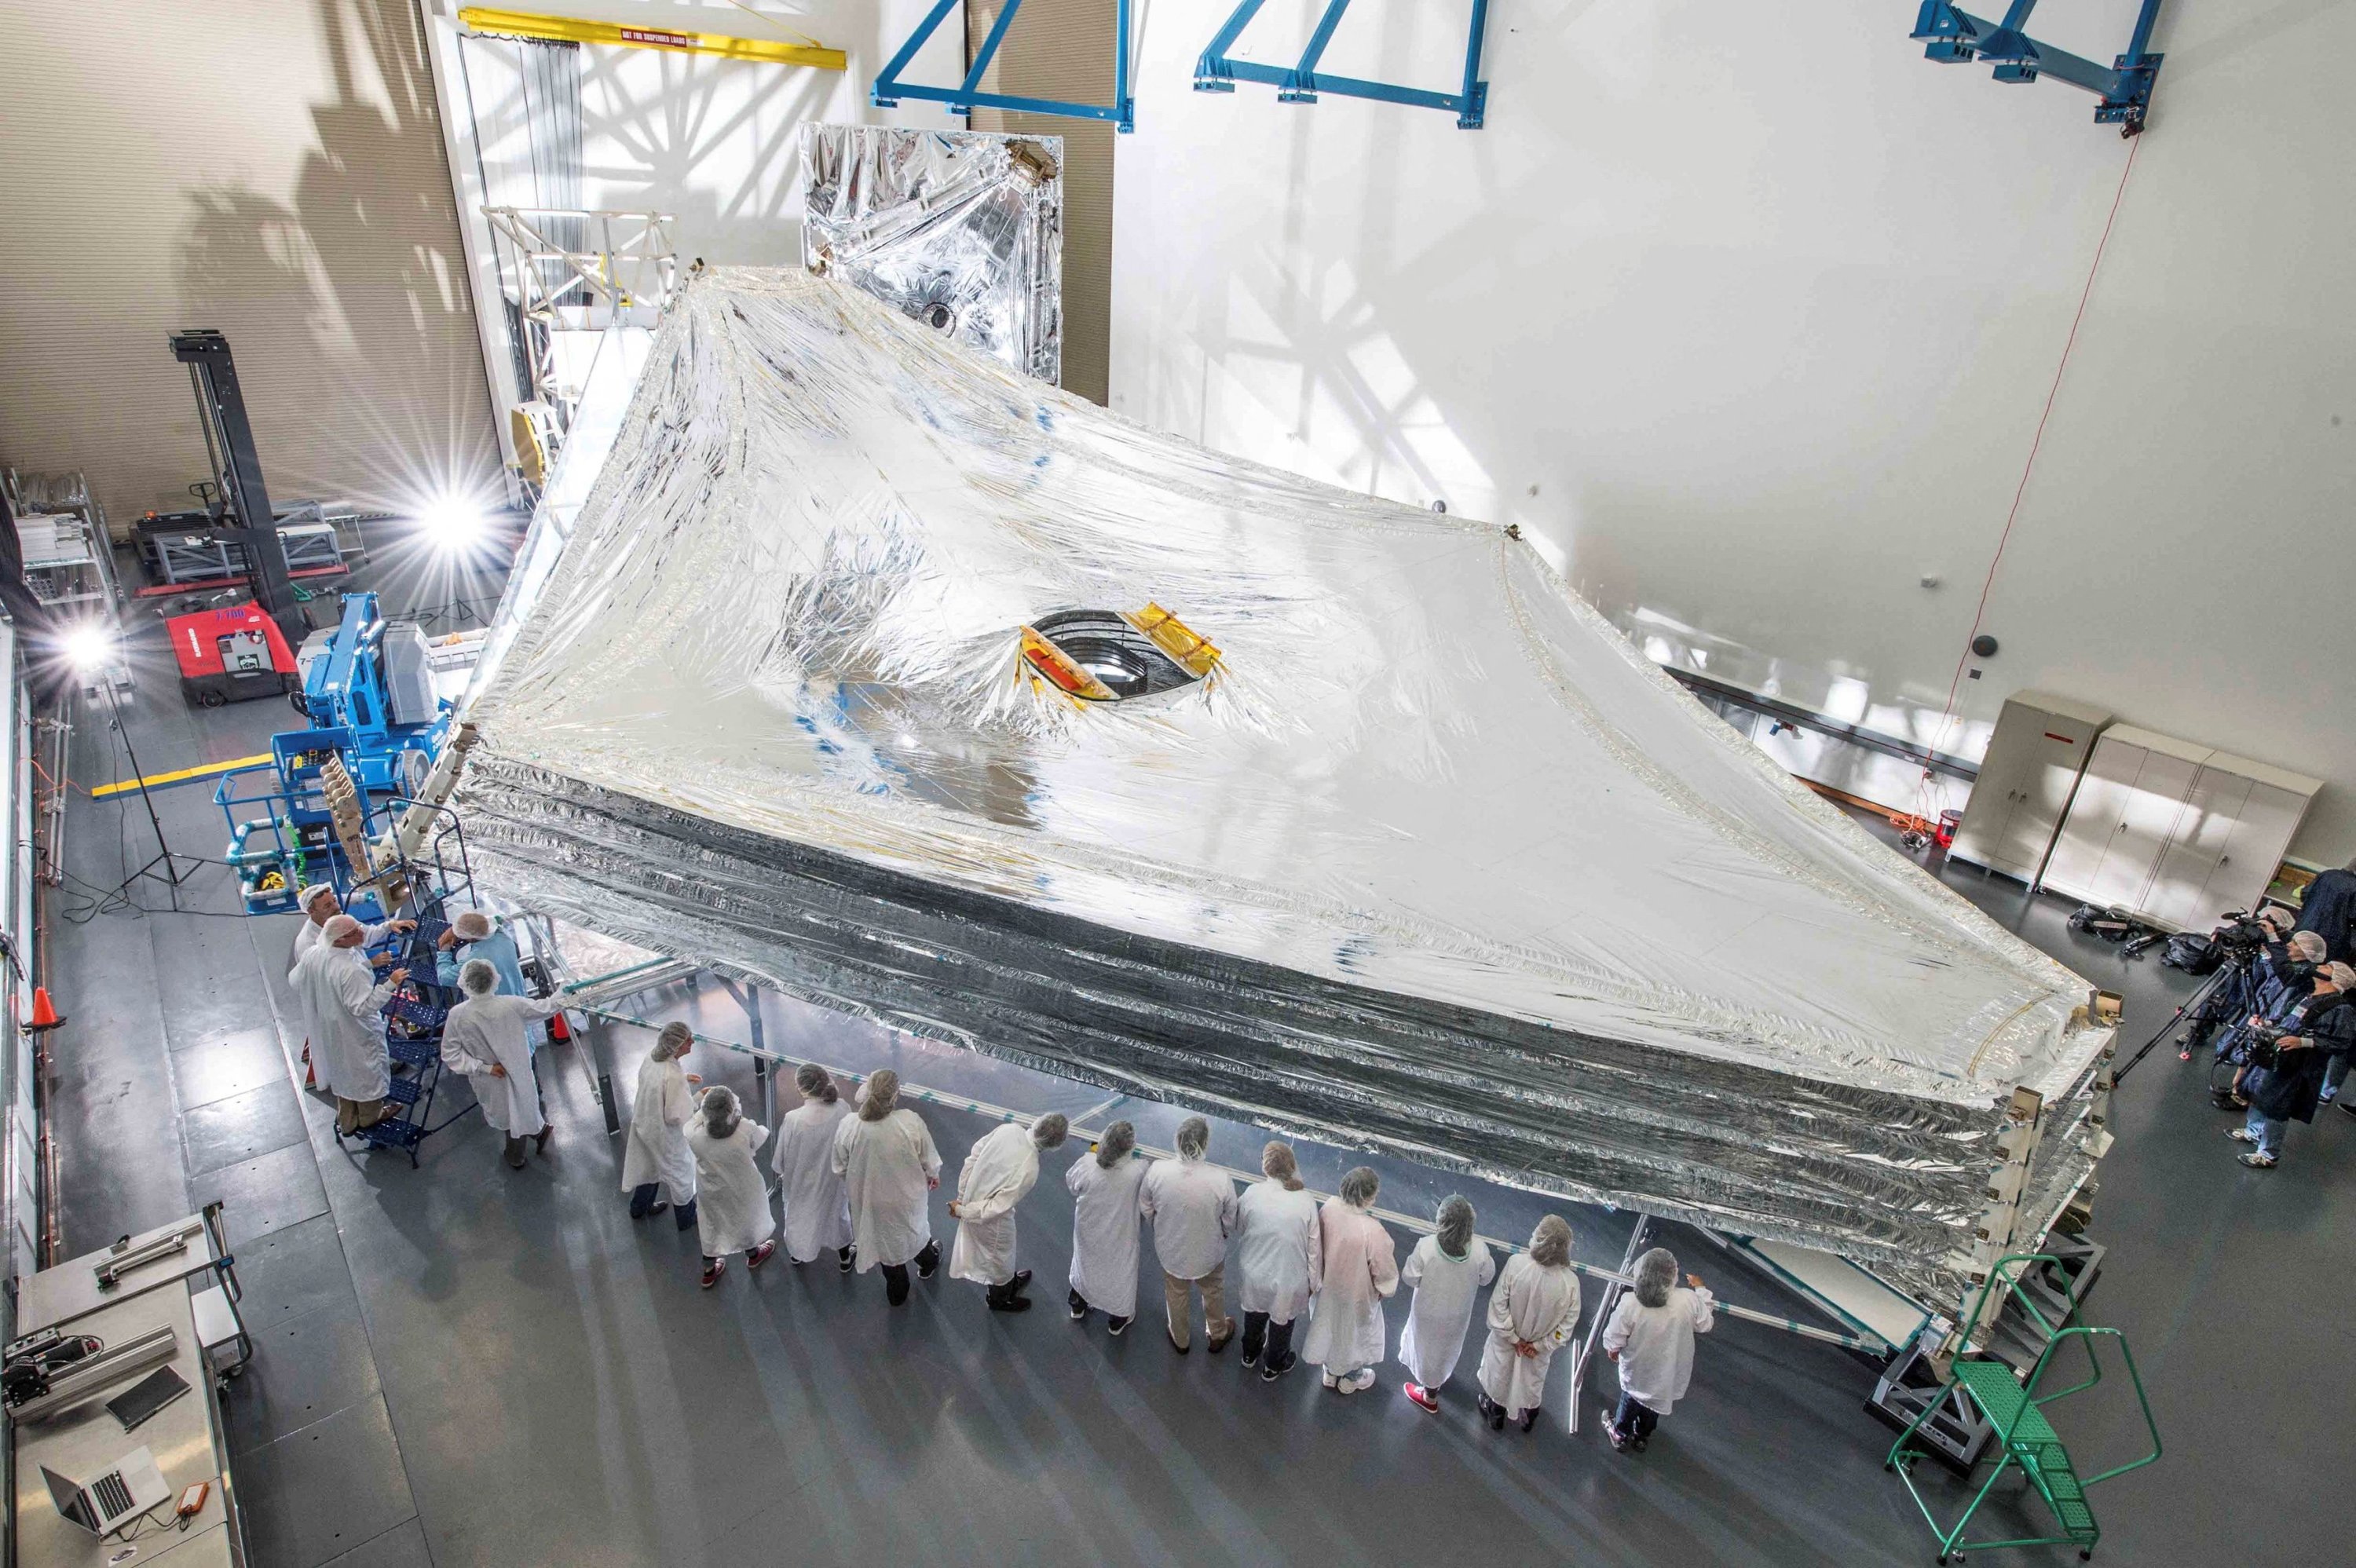 The Sunshield test unit to be used on NASA's James Webb Space Telescope is stacked and expanded at a cleanroom in the Northrop Grumman facility in Redondo Beach, California, U.S., July 25, 2014. (Reuters Photo)